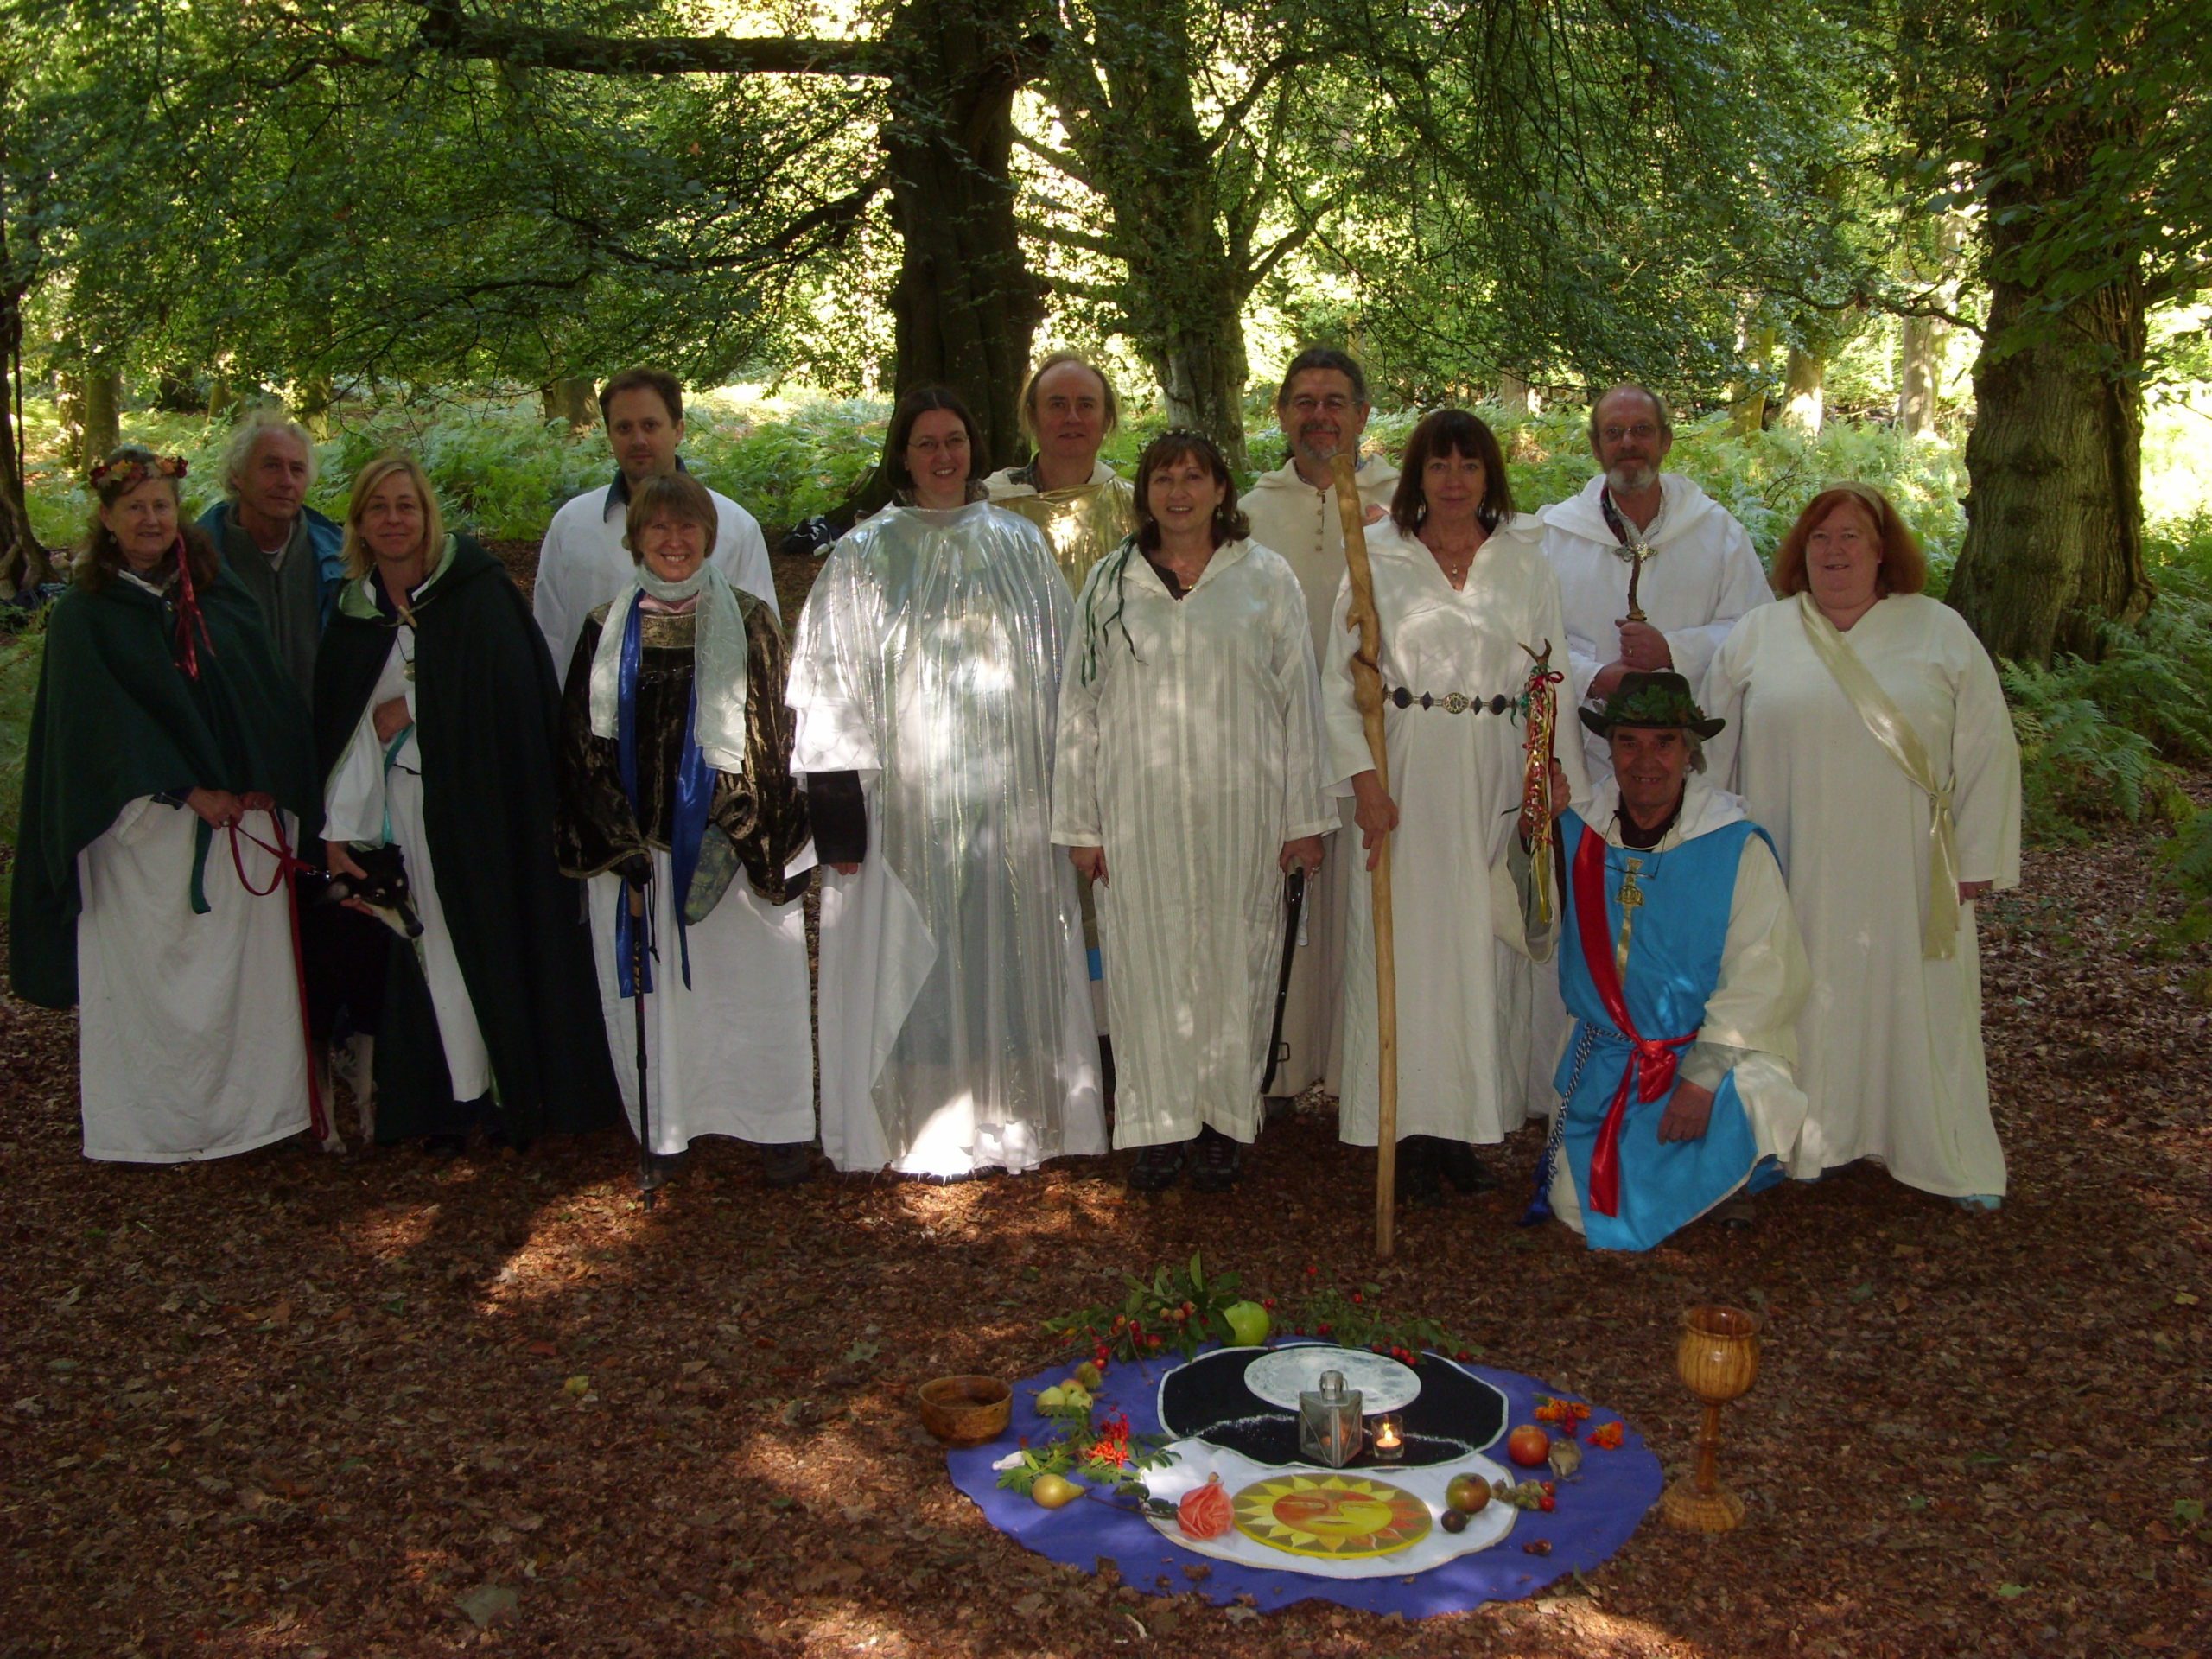 Autumn20Equinox202010206 scaled, Order of Bards, Ovates & Druids.